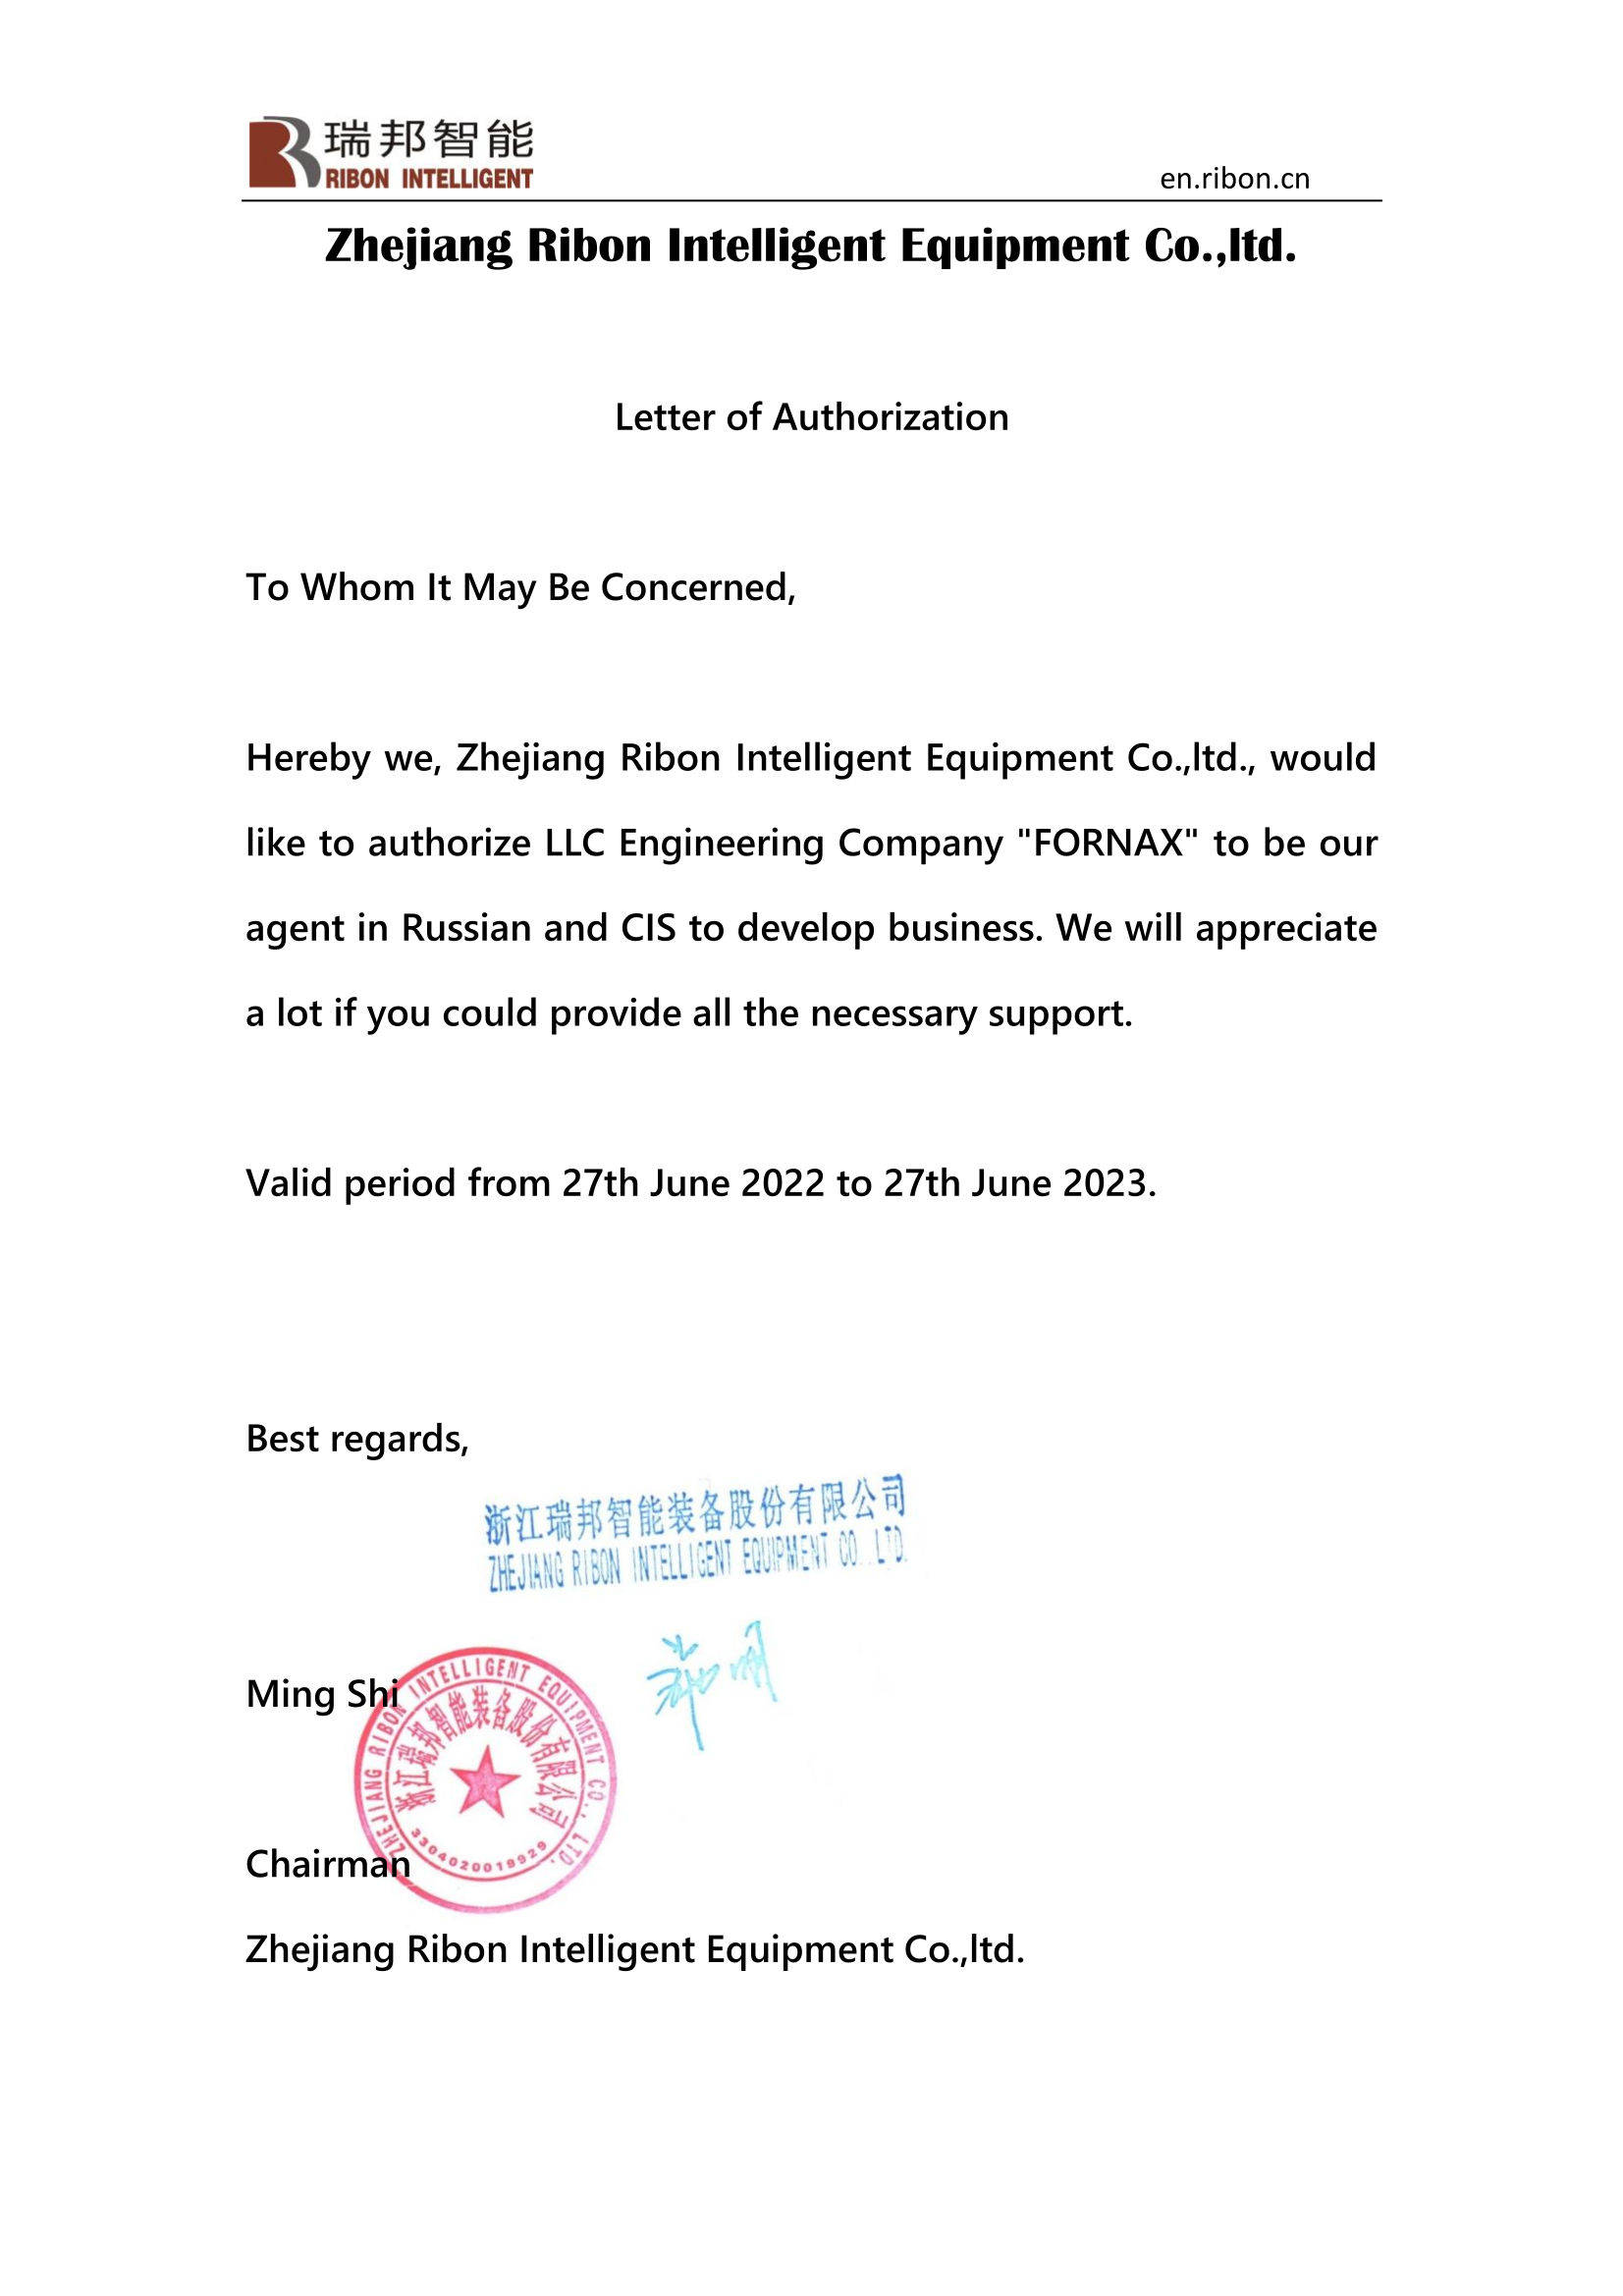 Letter of Authorization-till-2023